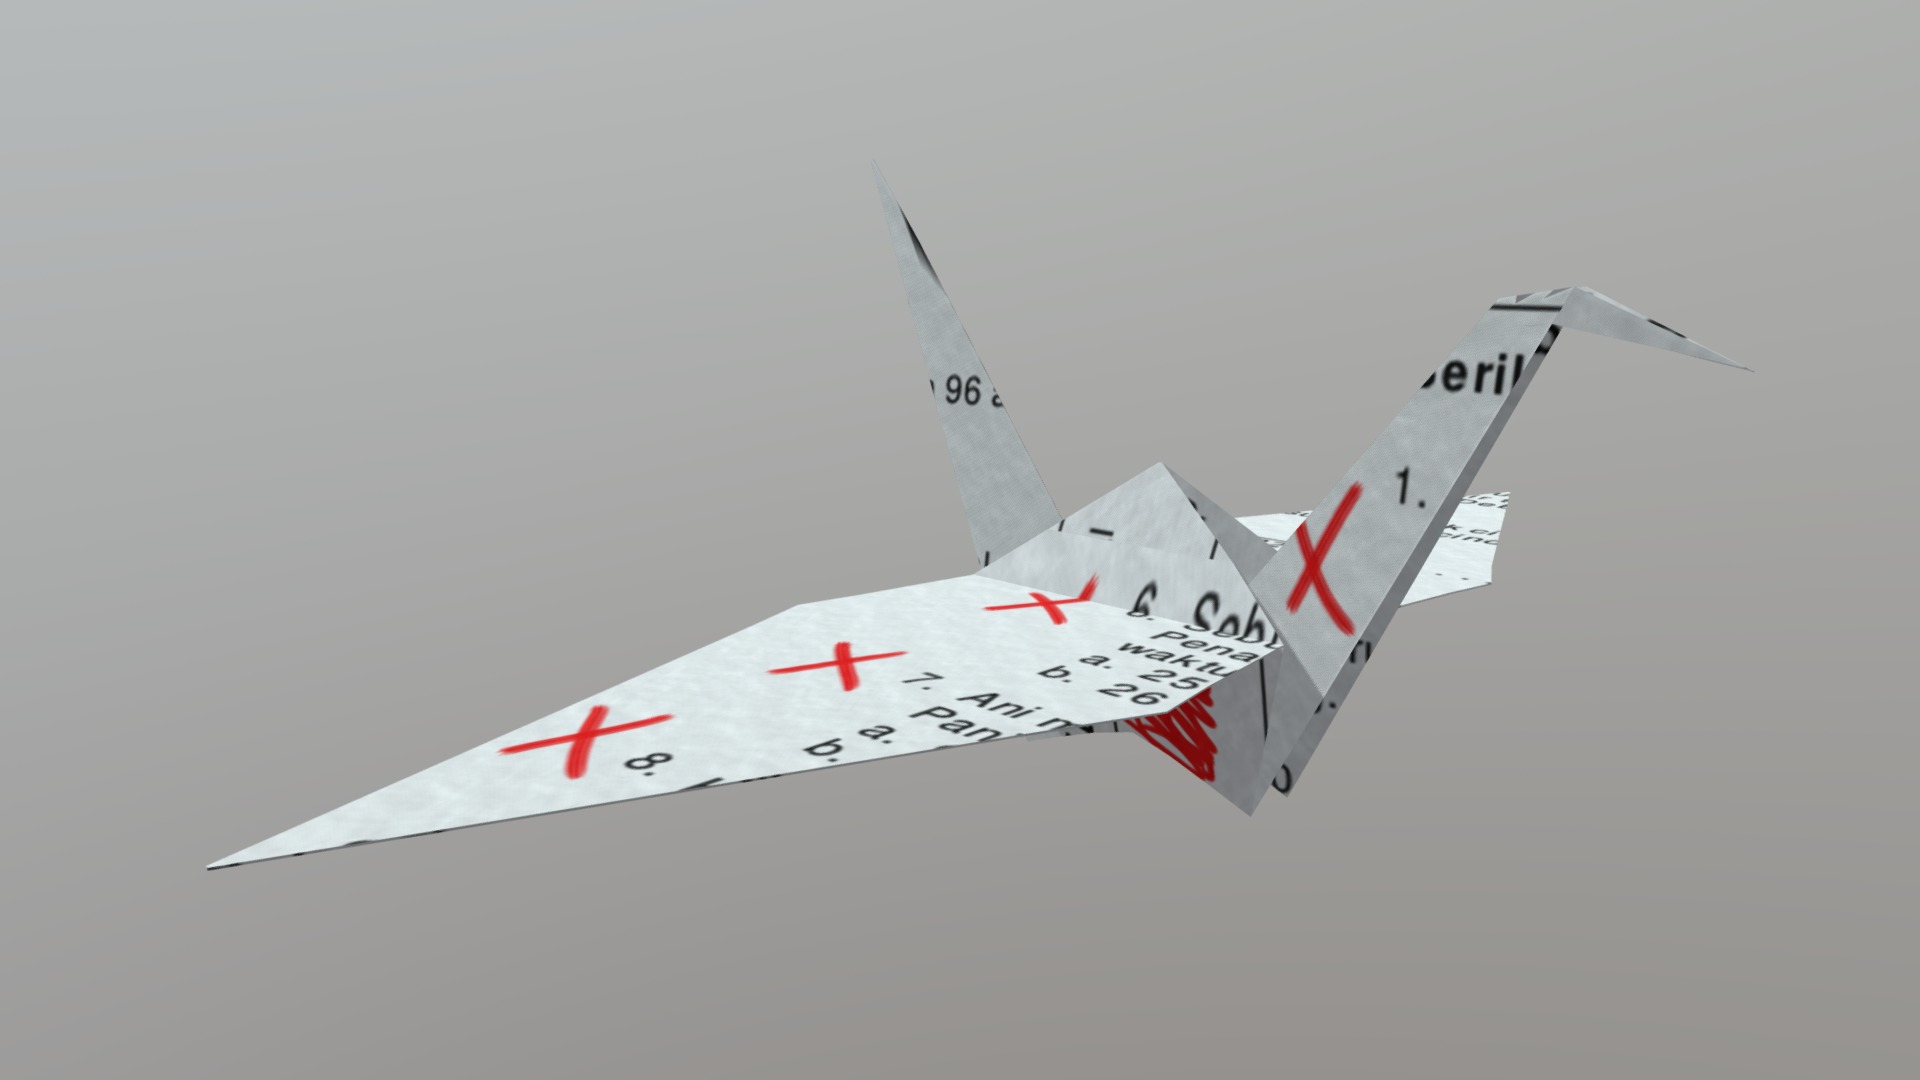 3D model mathematics origami - This is a 3D model of the mathematics origami. The 3D model is about a close-up of a jet.